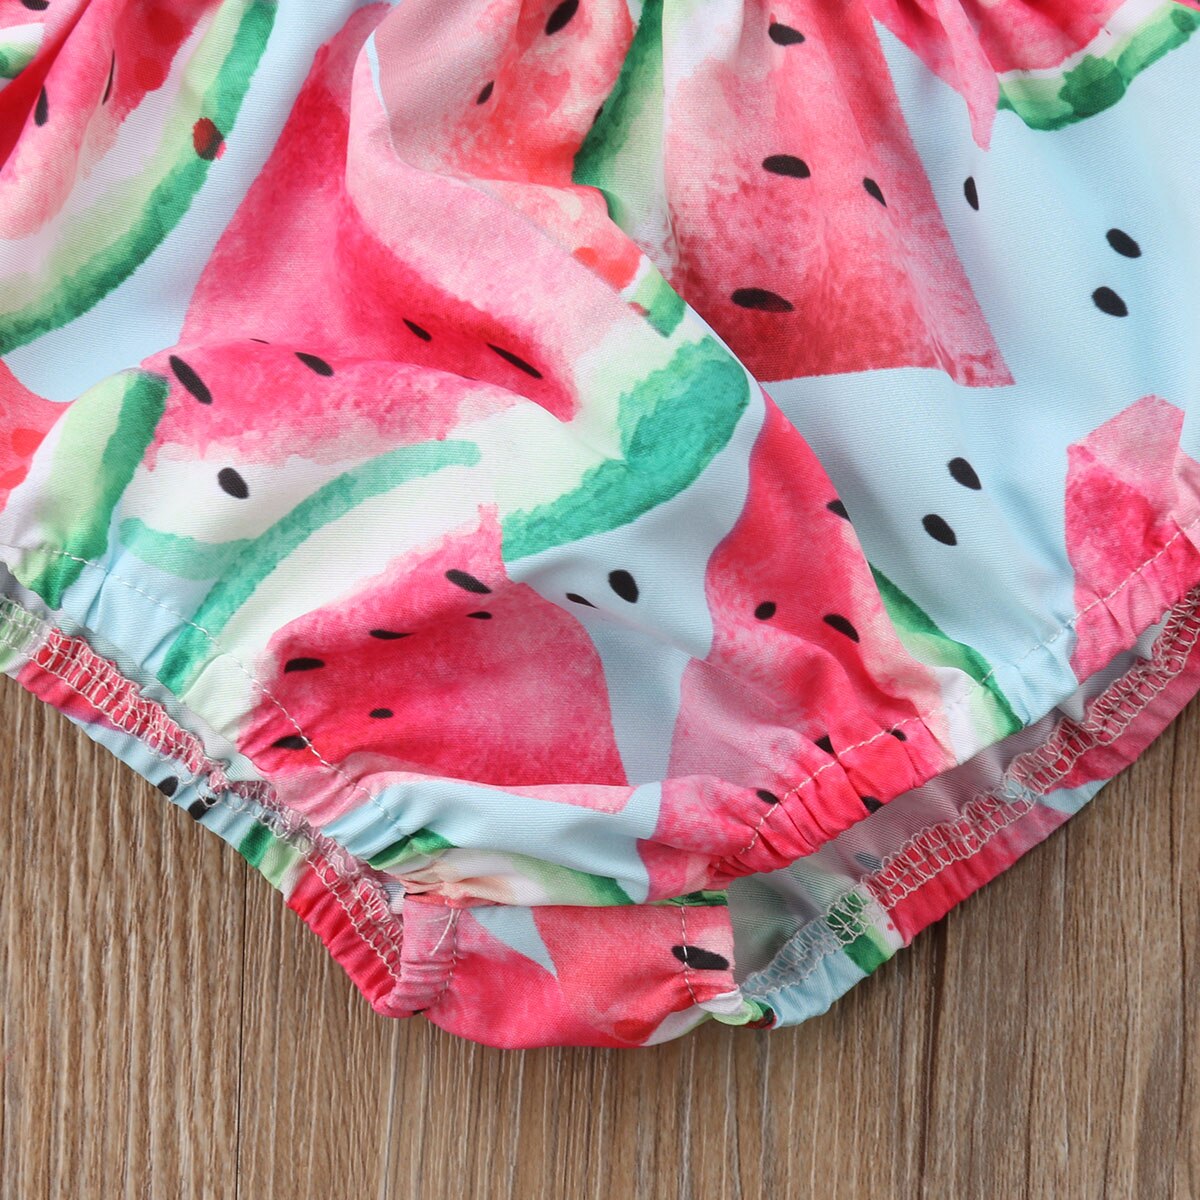 Pudcoco sommer bomuld baby dreng pige bukser shorts watermelon bloomers trusser shorts